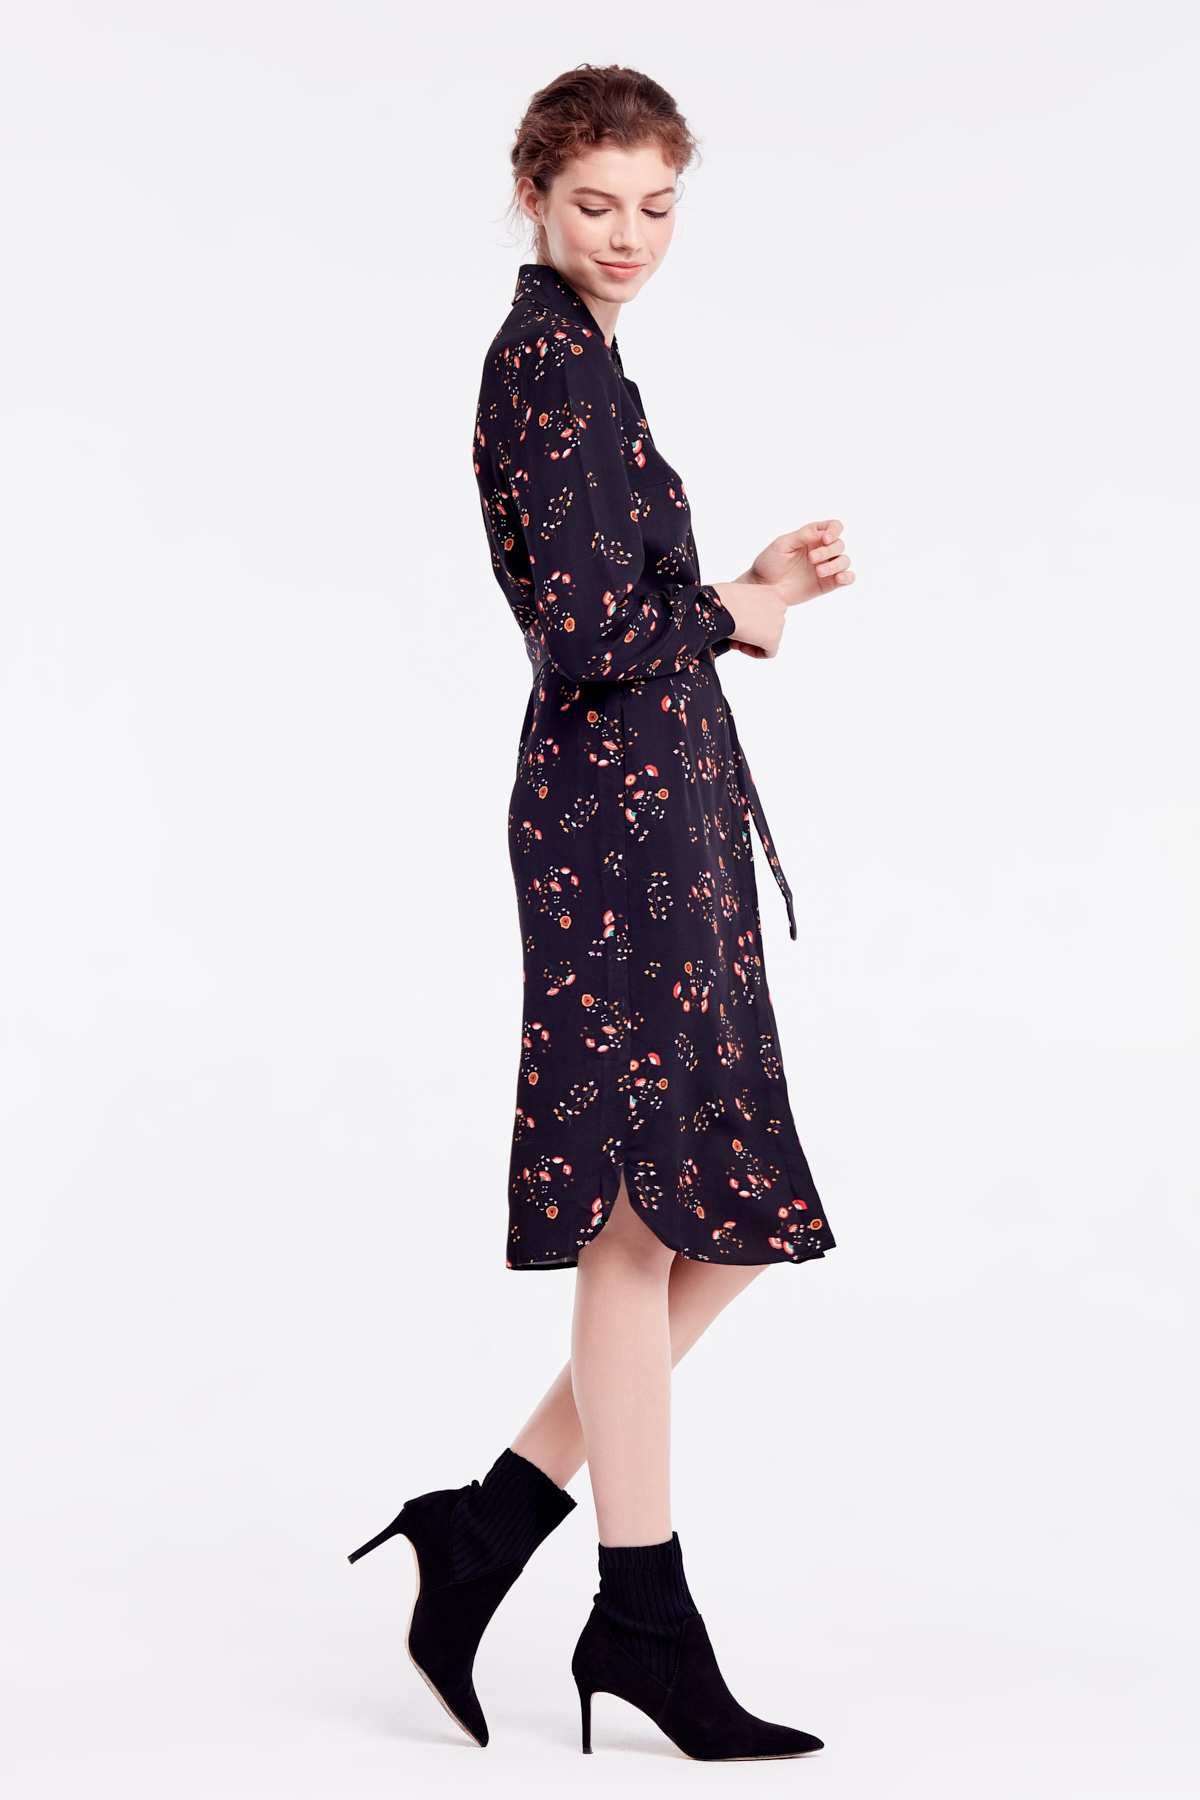 Black floral dress with a concealed placket, photo 7